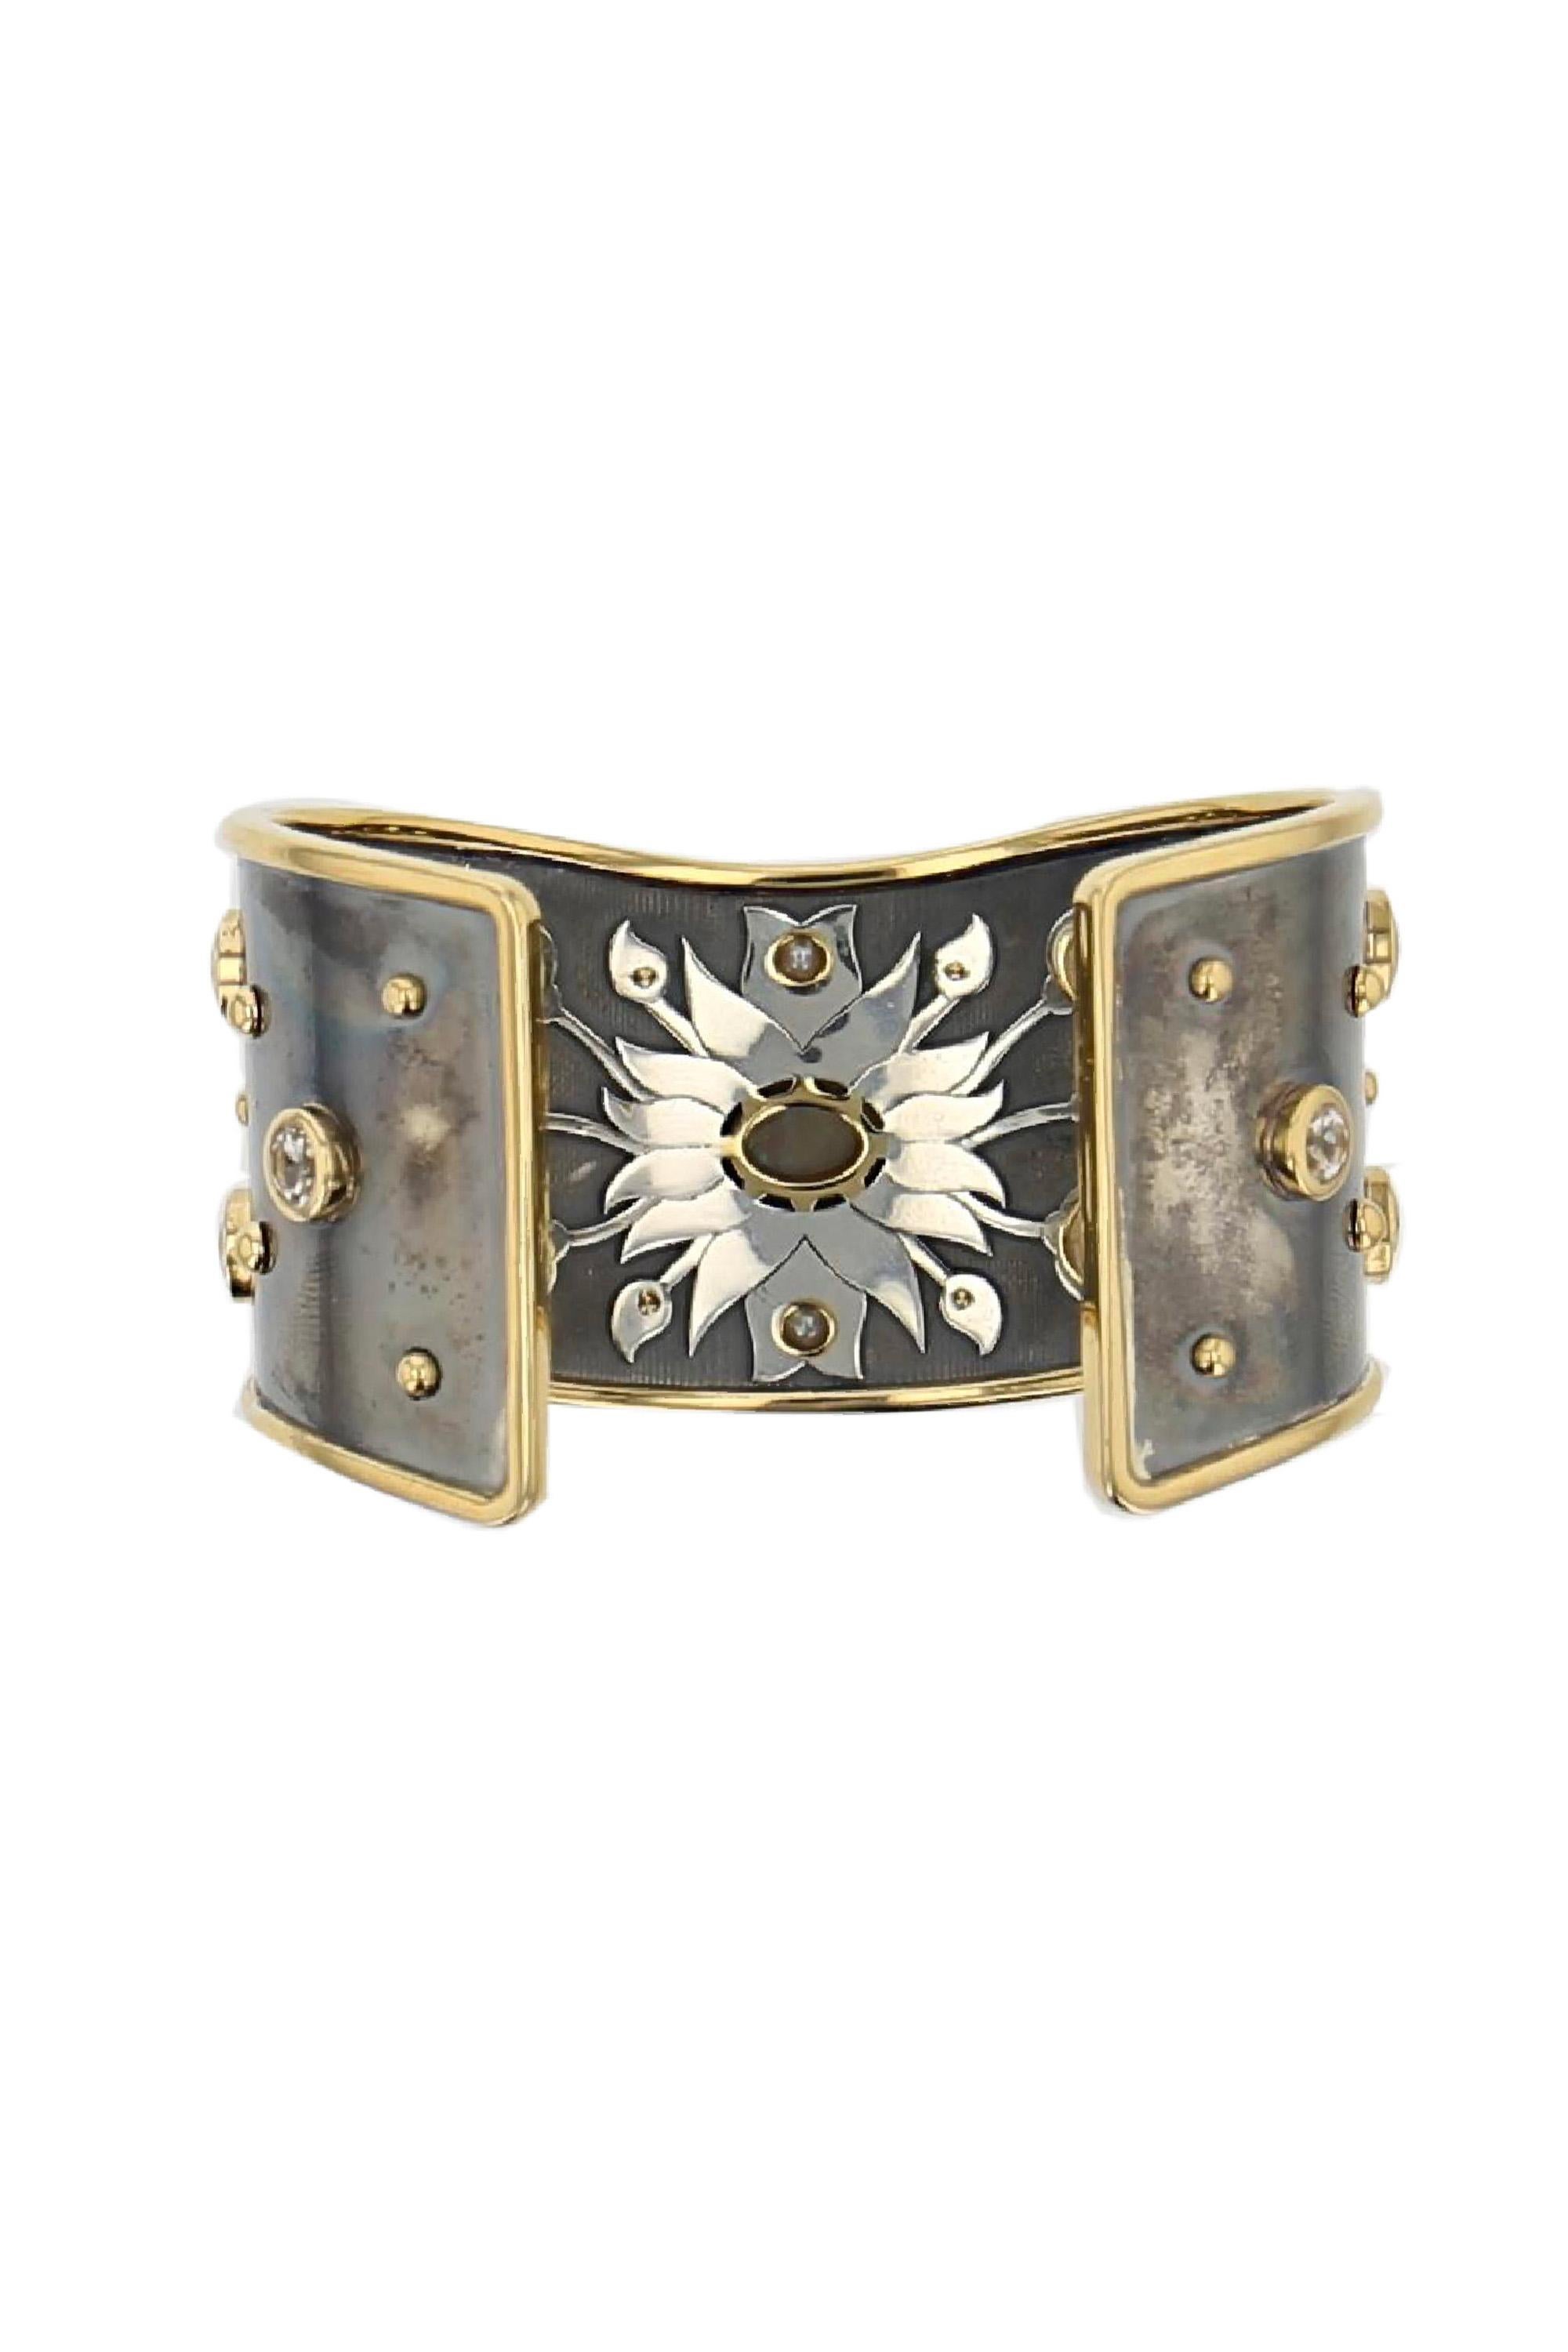 Diamond, Opal & Sapphire Bandeau Cuff in Gold & Distressed Silver by Elie Top In New Condition For Sale In Paris, France